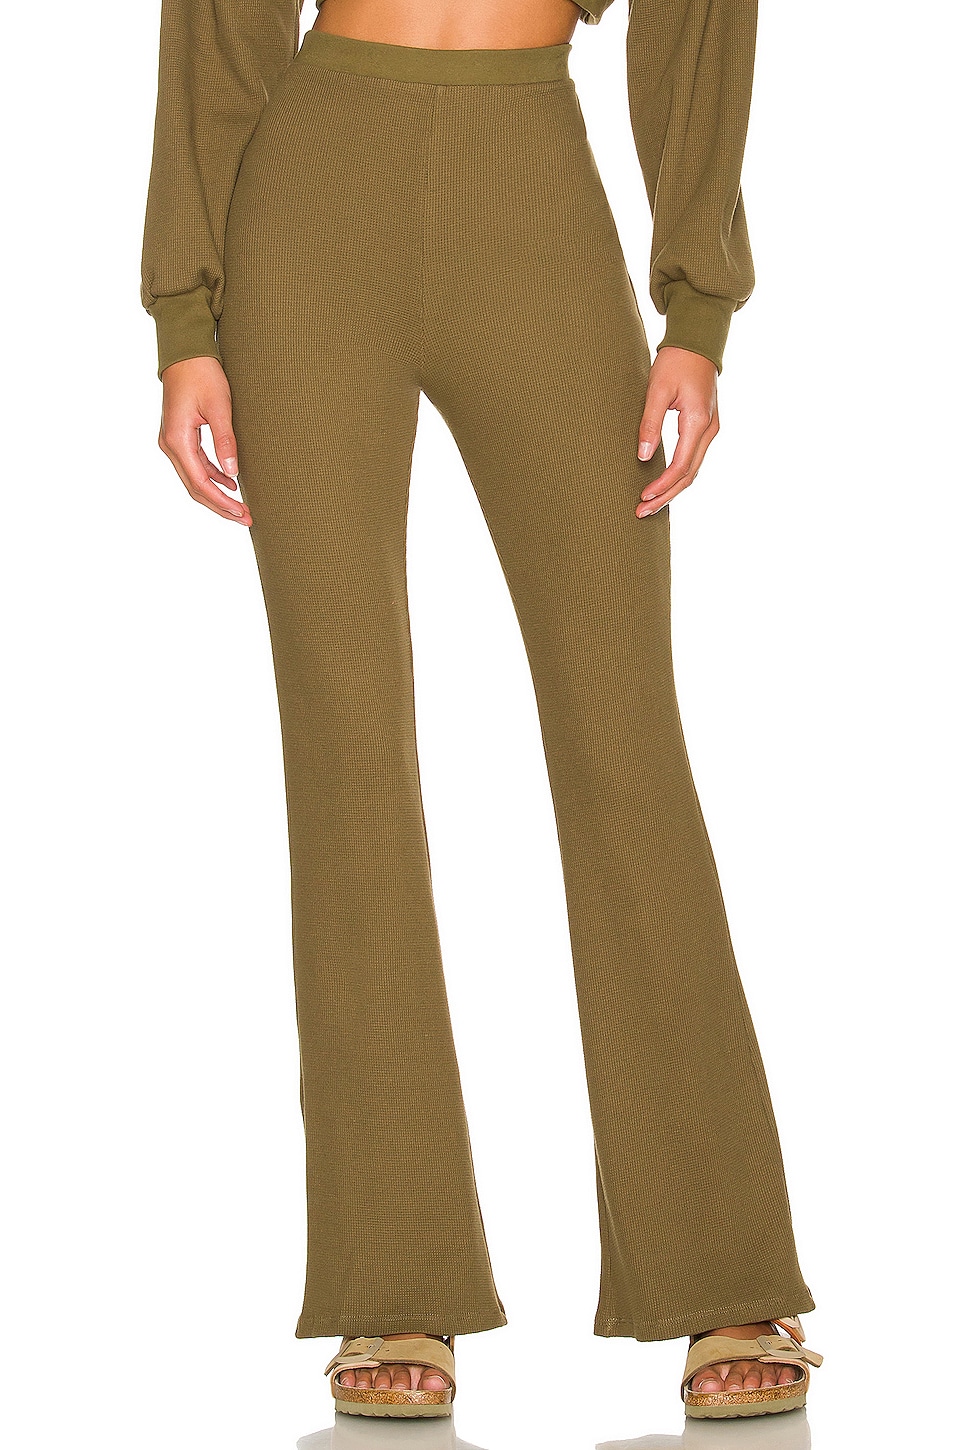 Lovers and Friends Winslow Pant in Olive Green